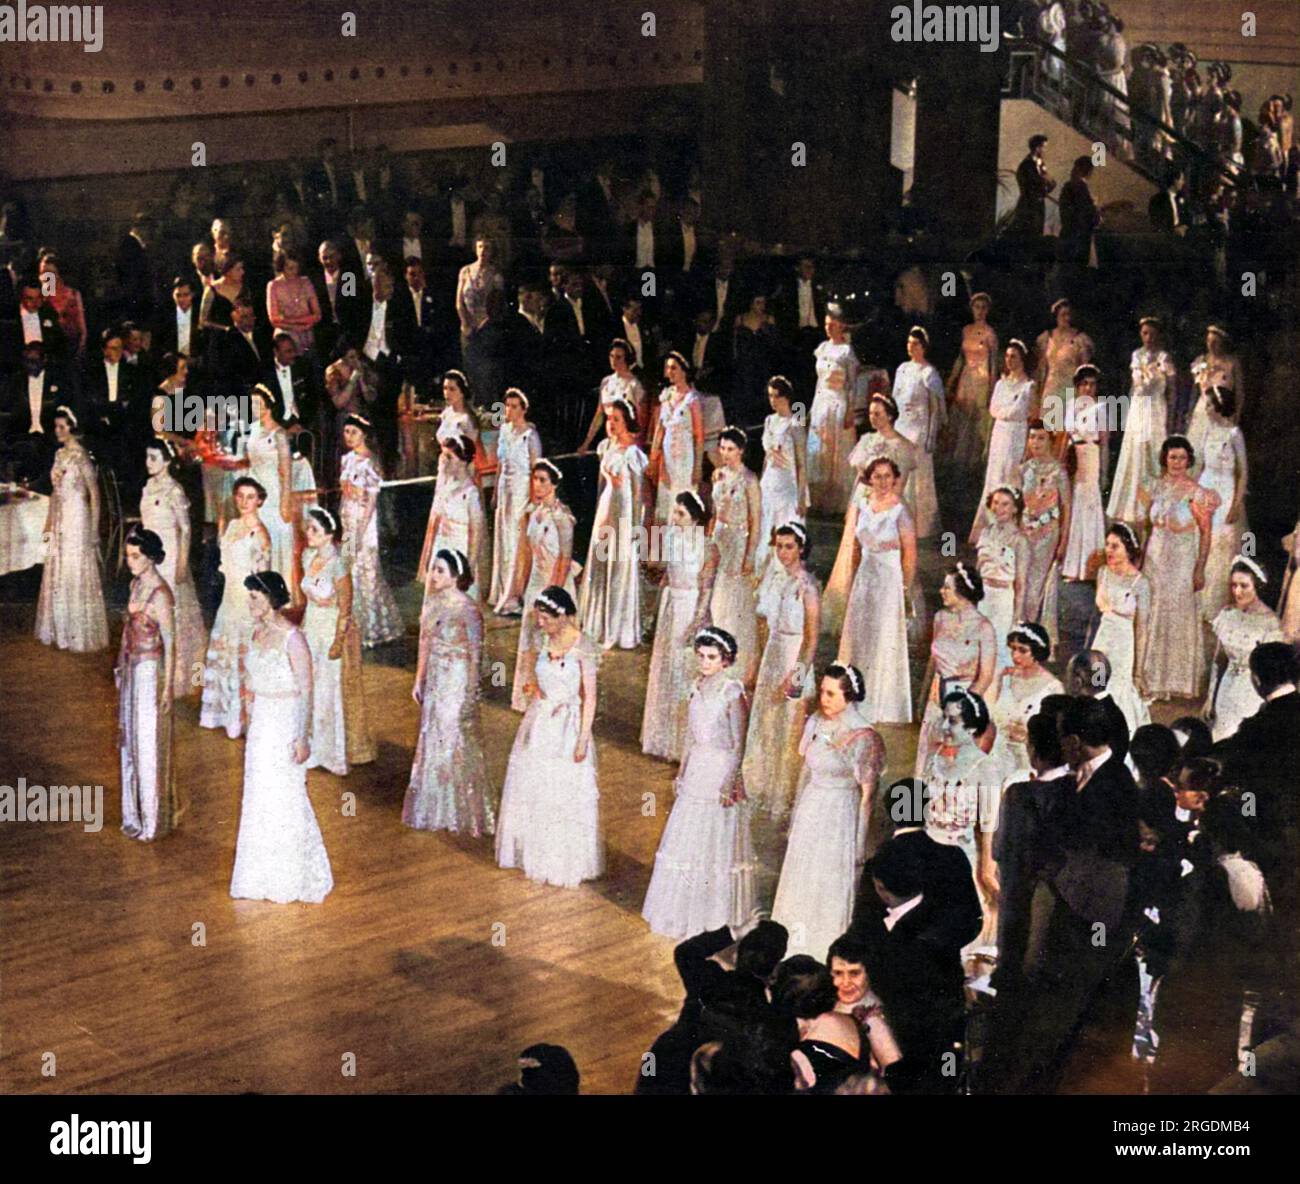 Gleaming in serried ranks: debutantes parading on the ballroom floor during Queen Charlotte's Ball before the traditional cutting of the cake, carried out in that Coronation year by the Duchess of Kent. Stock Photo